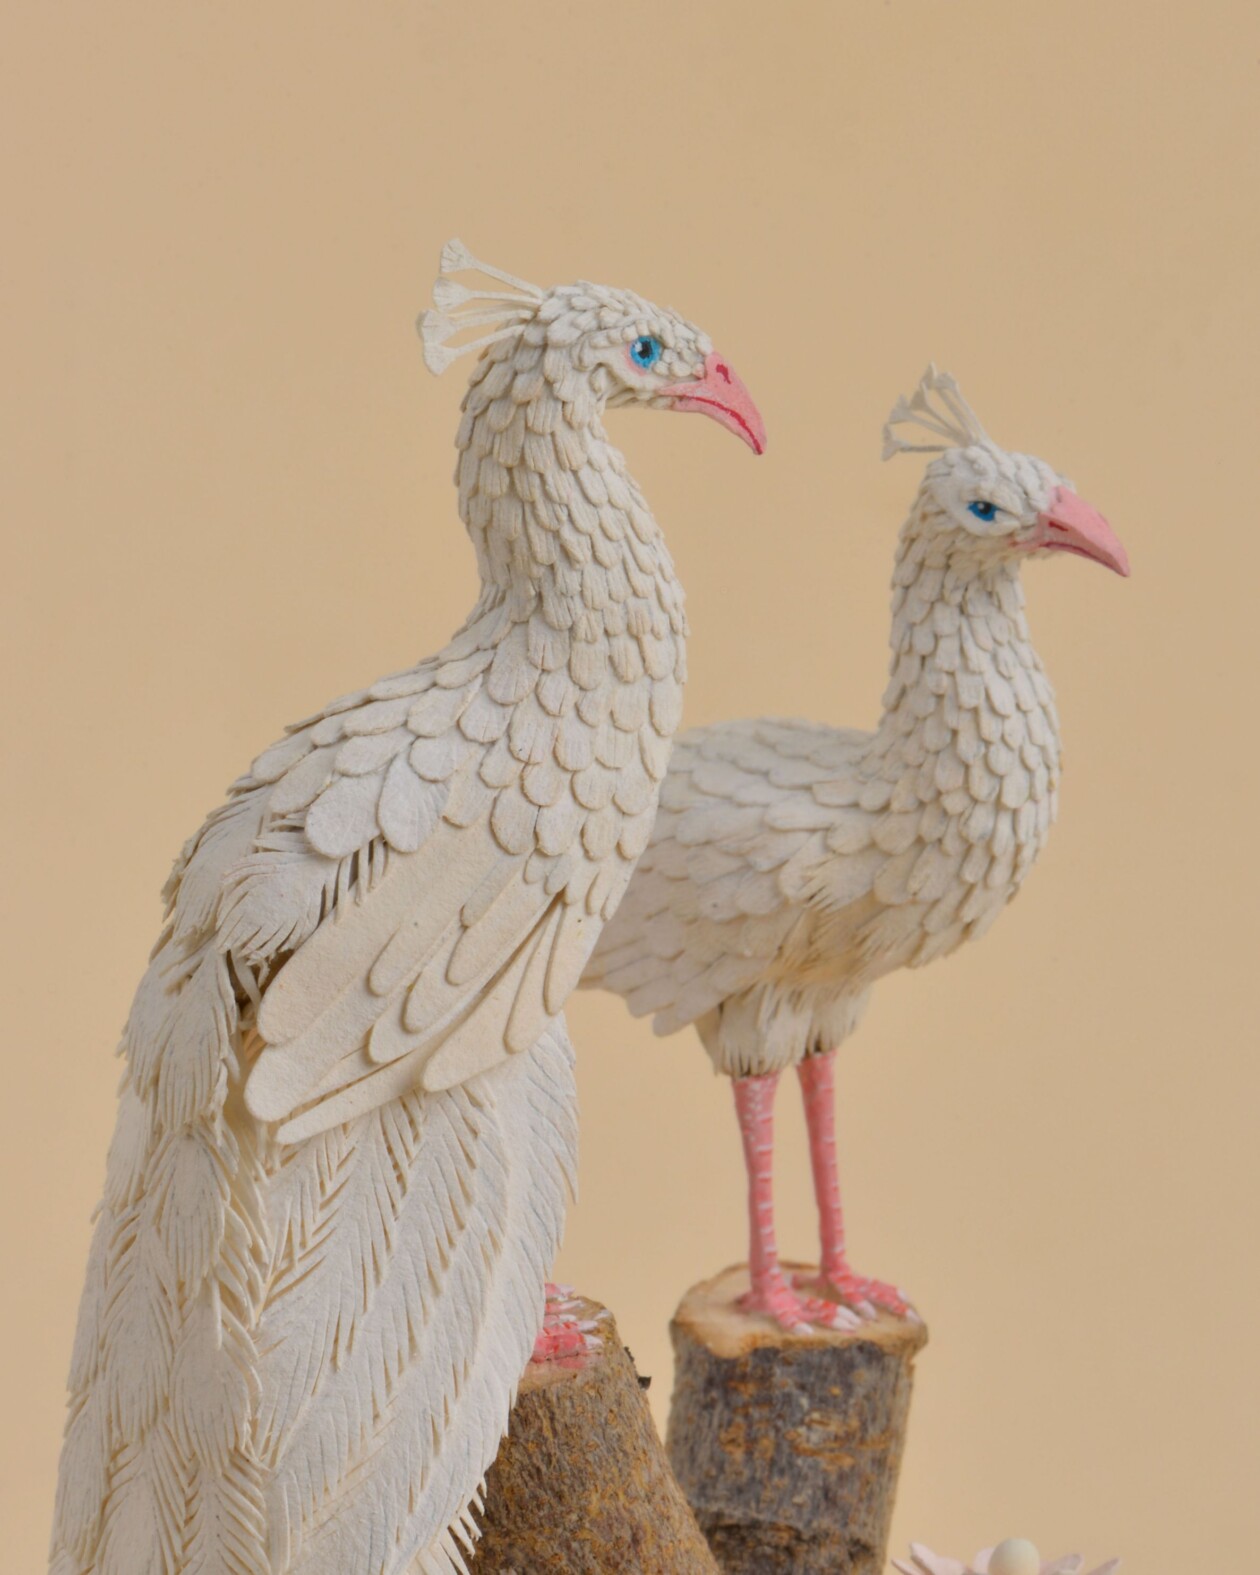 Miniature Bird Paper Sculptures With Whimsical Details By Nayan And Venus (2)